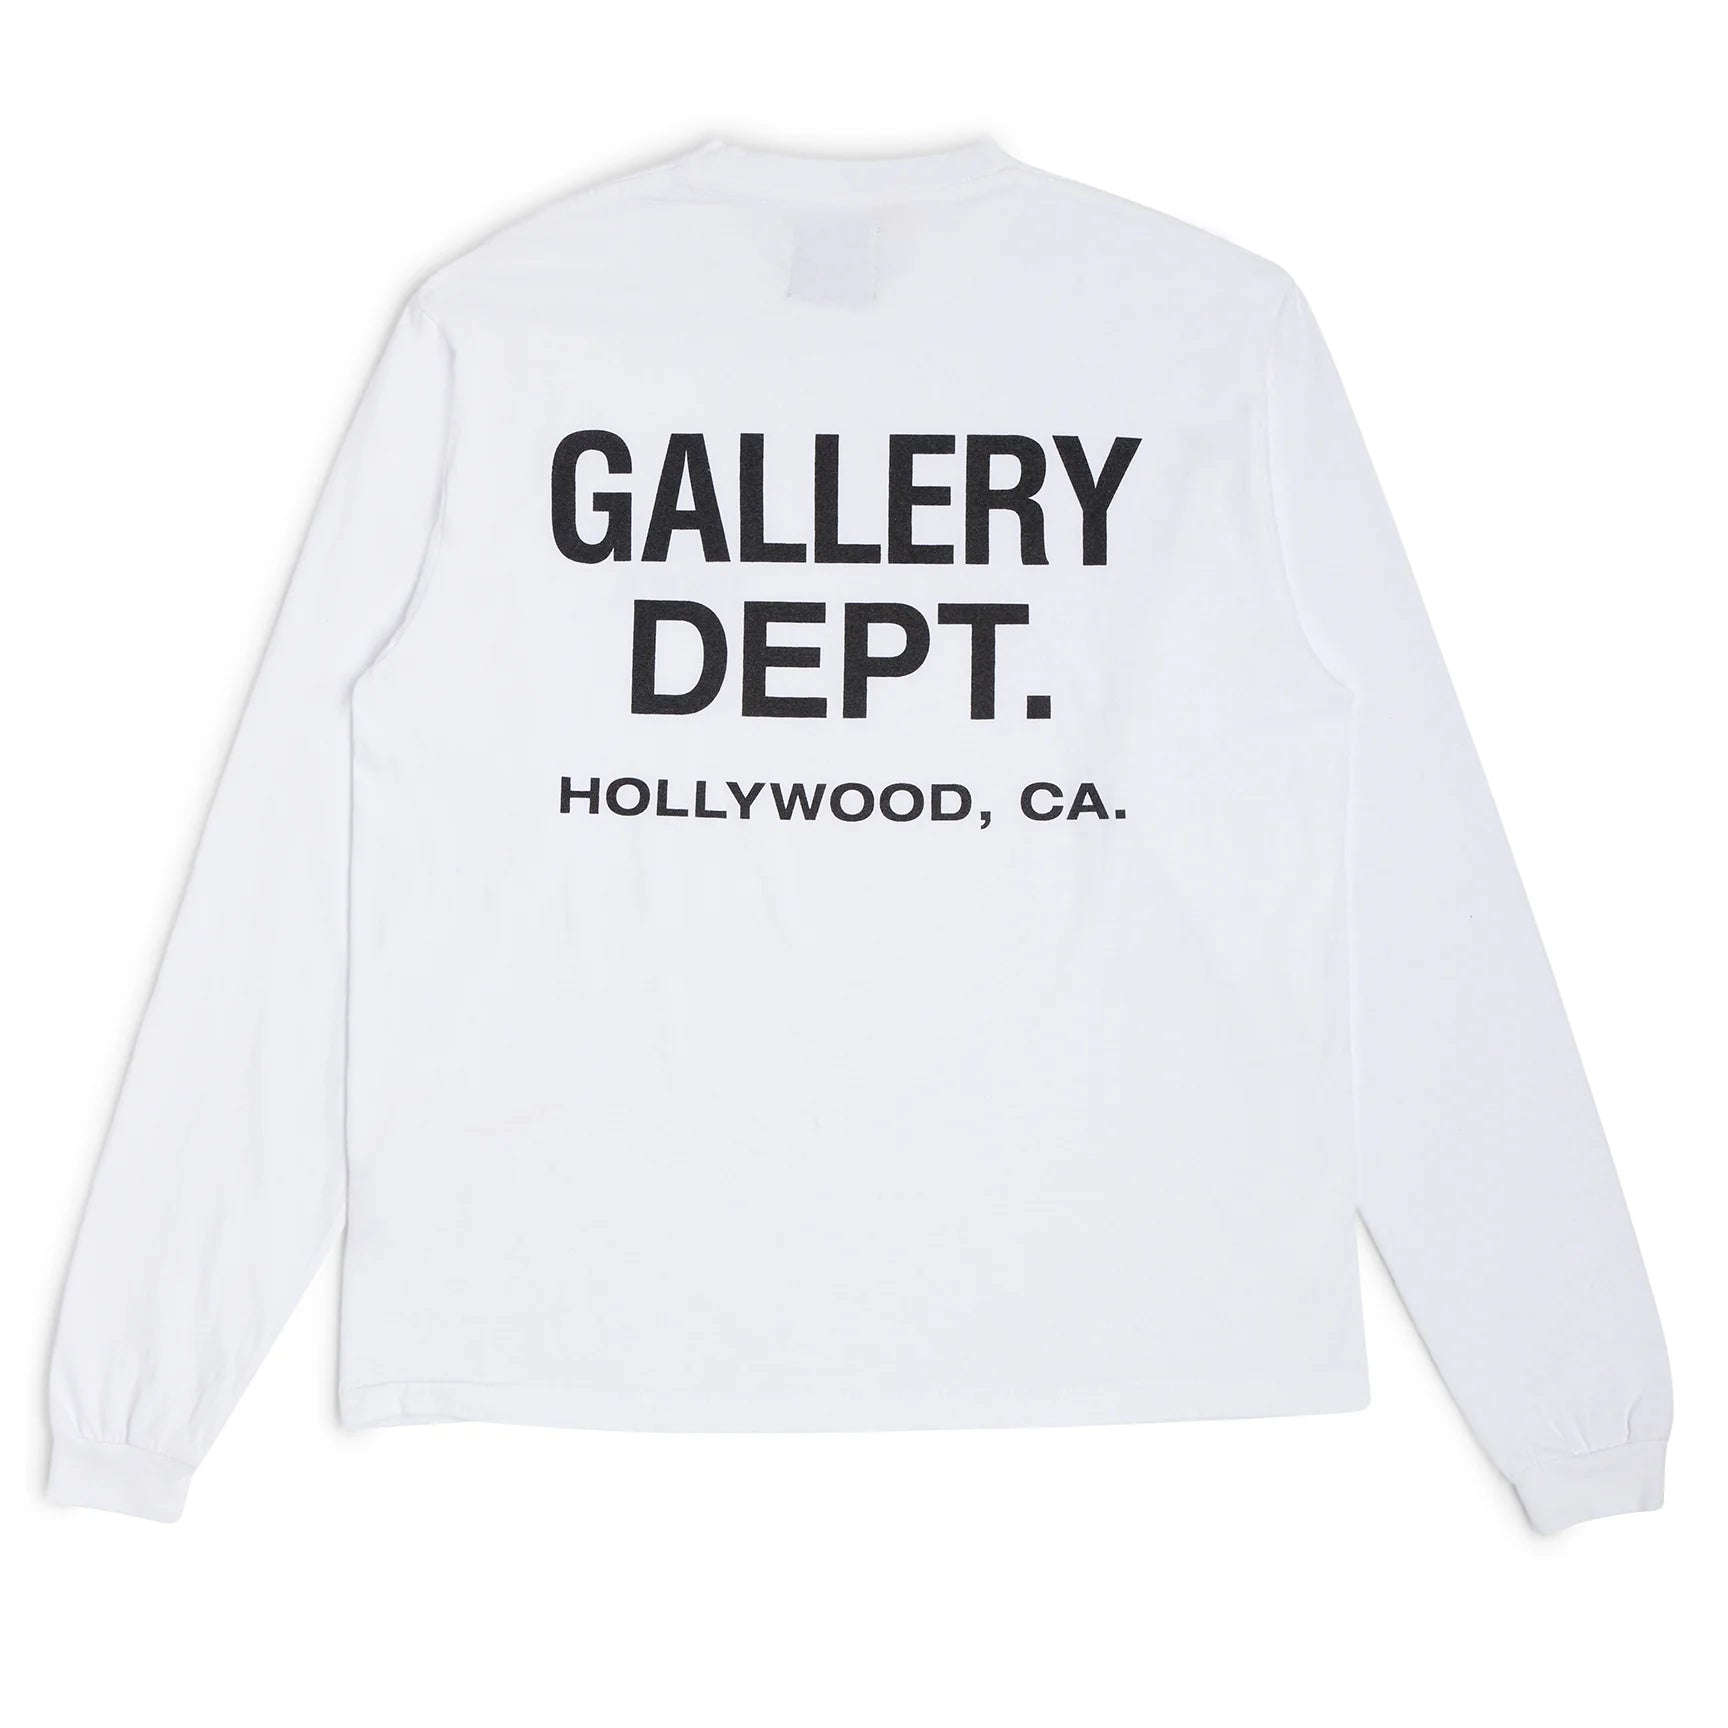 Gallery Dept. Souvenir L/S T-shirt White by GALLERY DEPT. from £250.00